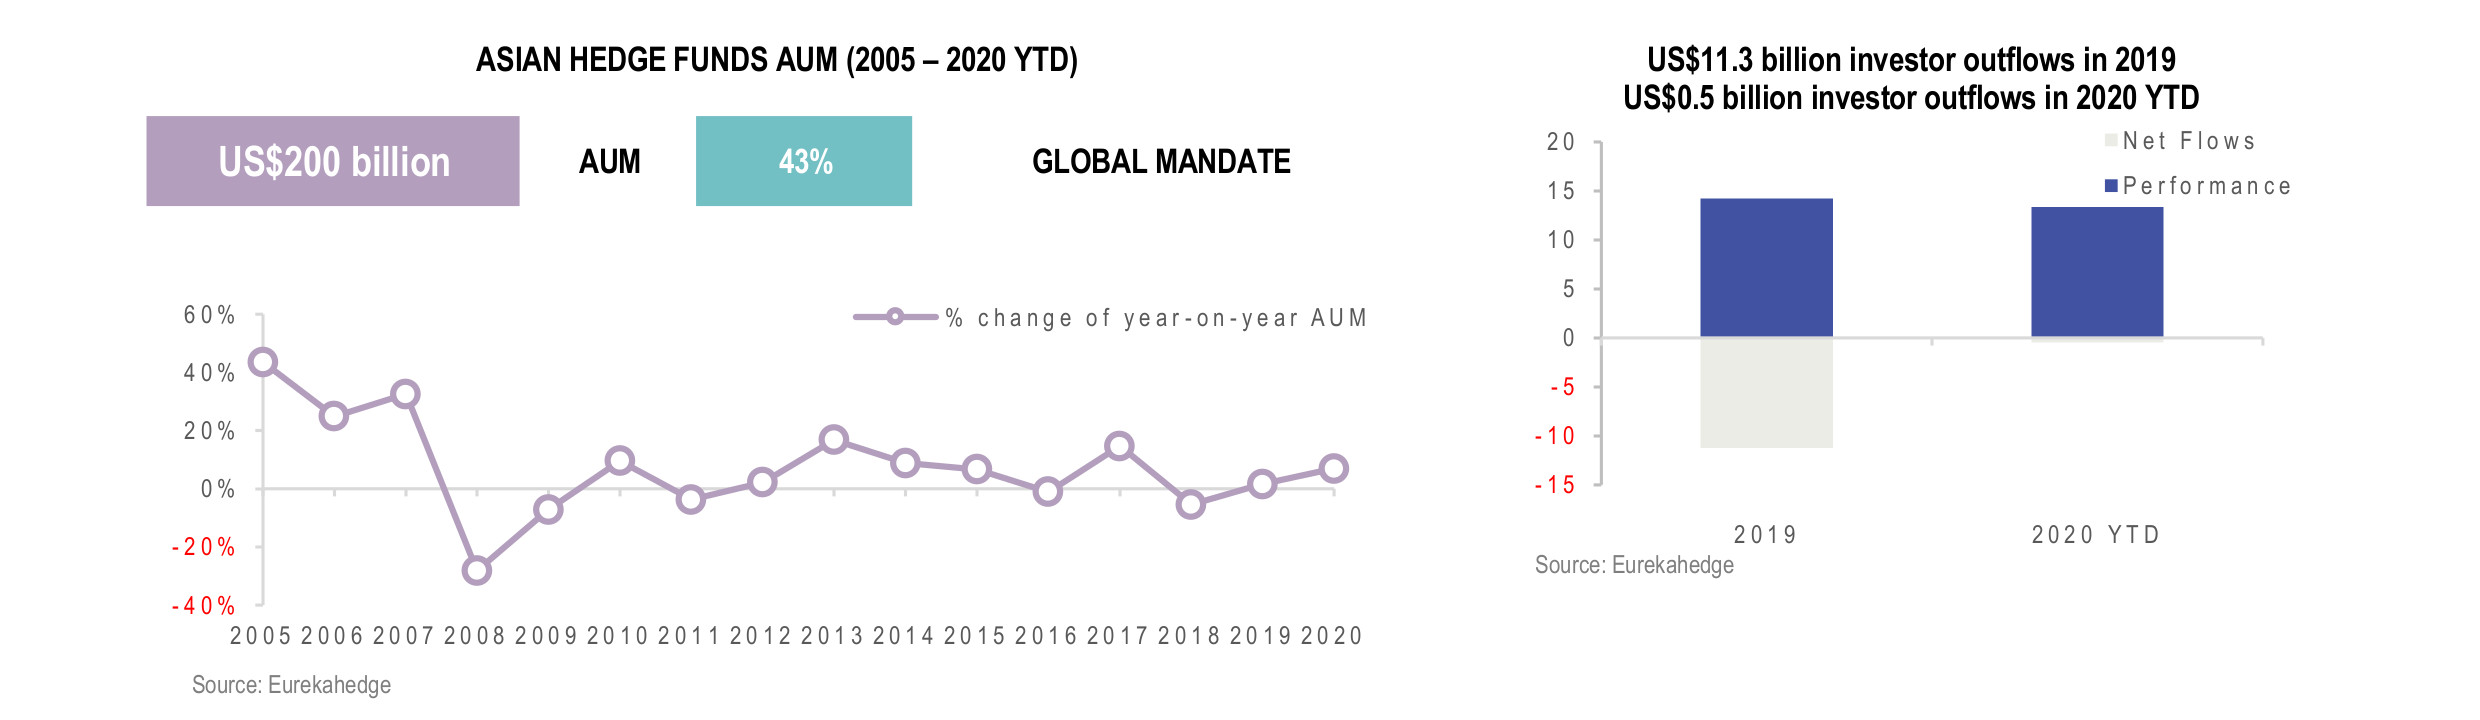 Asian Hedge Funds Infographic February 2021 - AUM